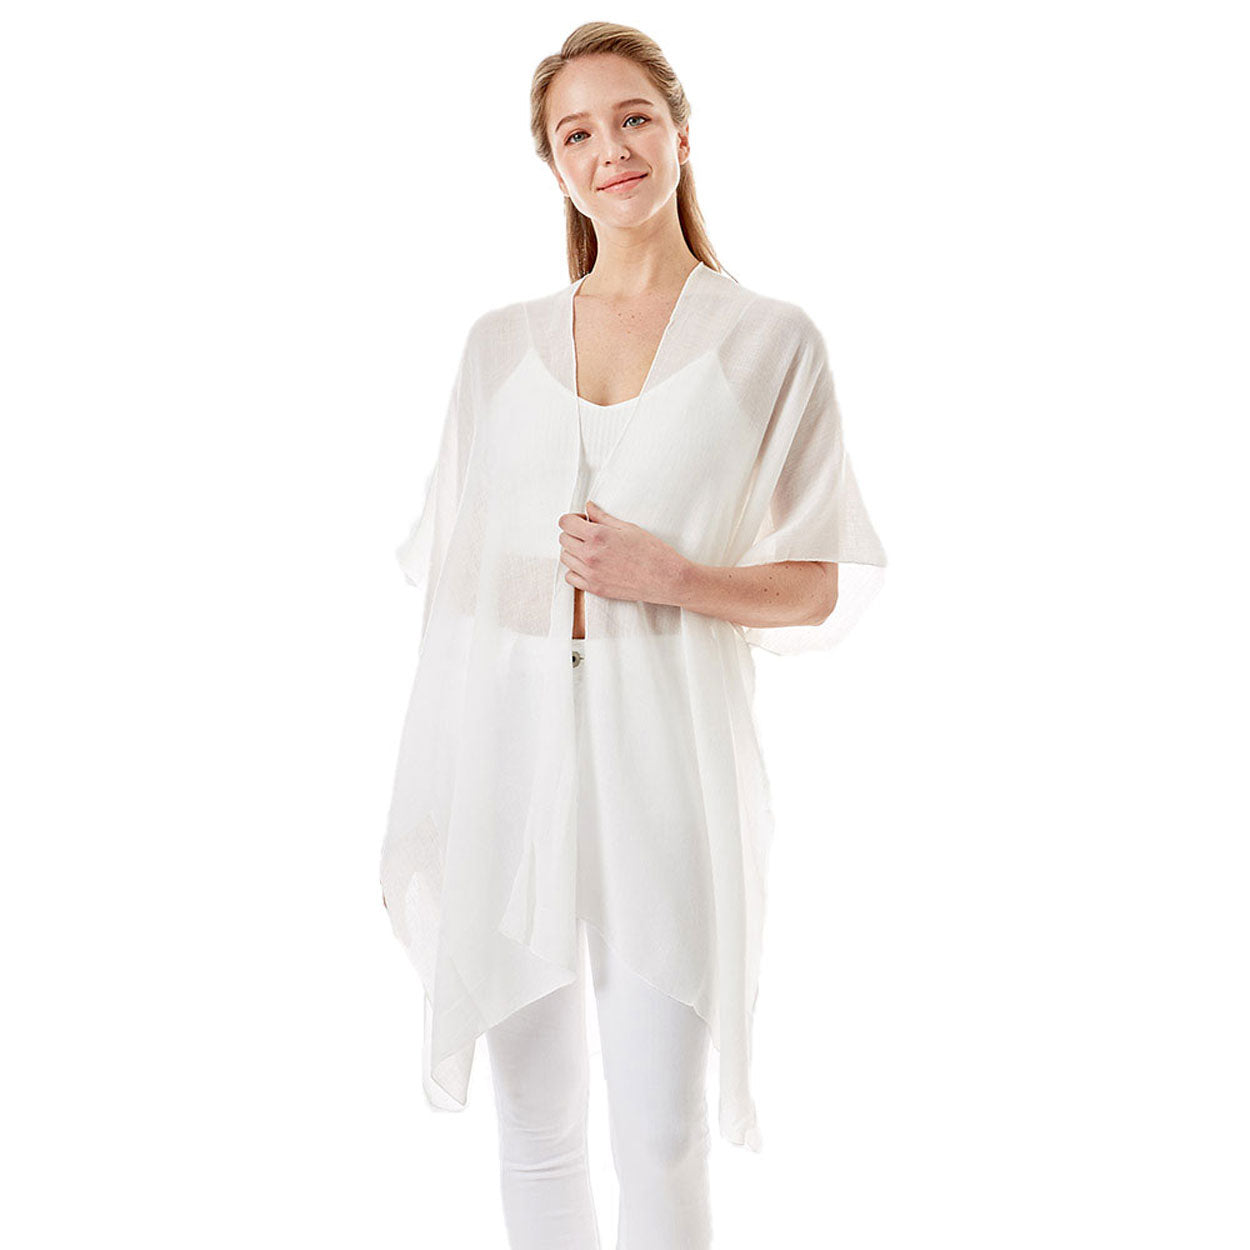 White Maid of Honor Solid Lettering Cover Up Poncho, The lightweight poncho top is made of soft and breathable Viscose material. short sleeve swimsuit cover up with open front design, simple basic style, easy to put on and down. Perfect Gift for Wife, Mom, Birthday, Holiday, Anniversary, Fun Night Out.